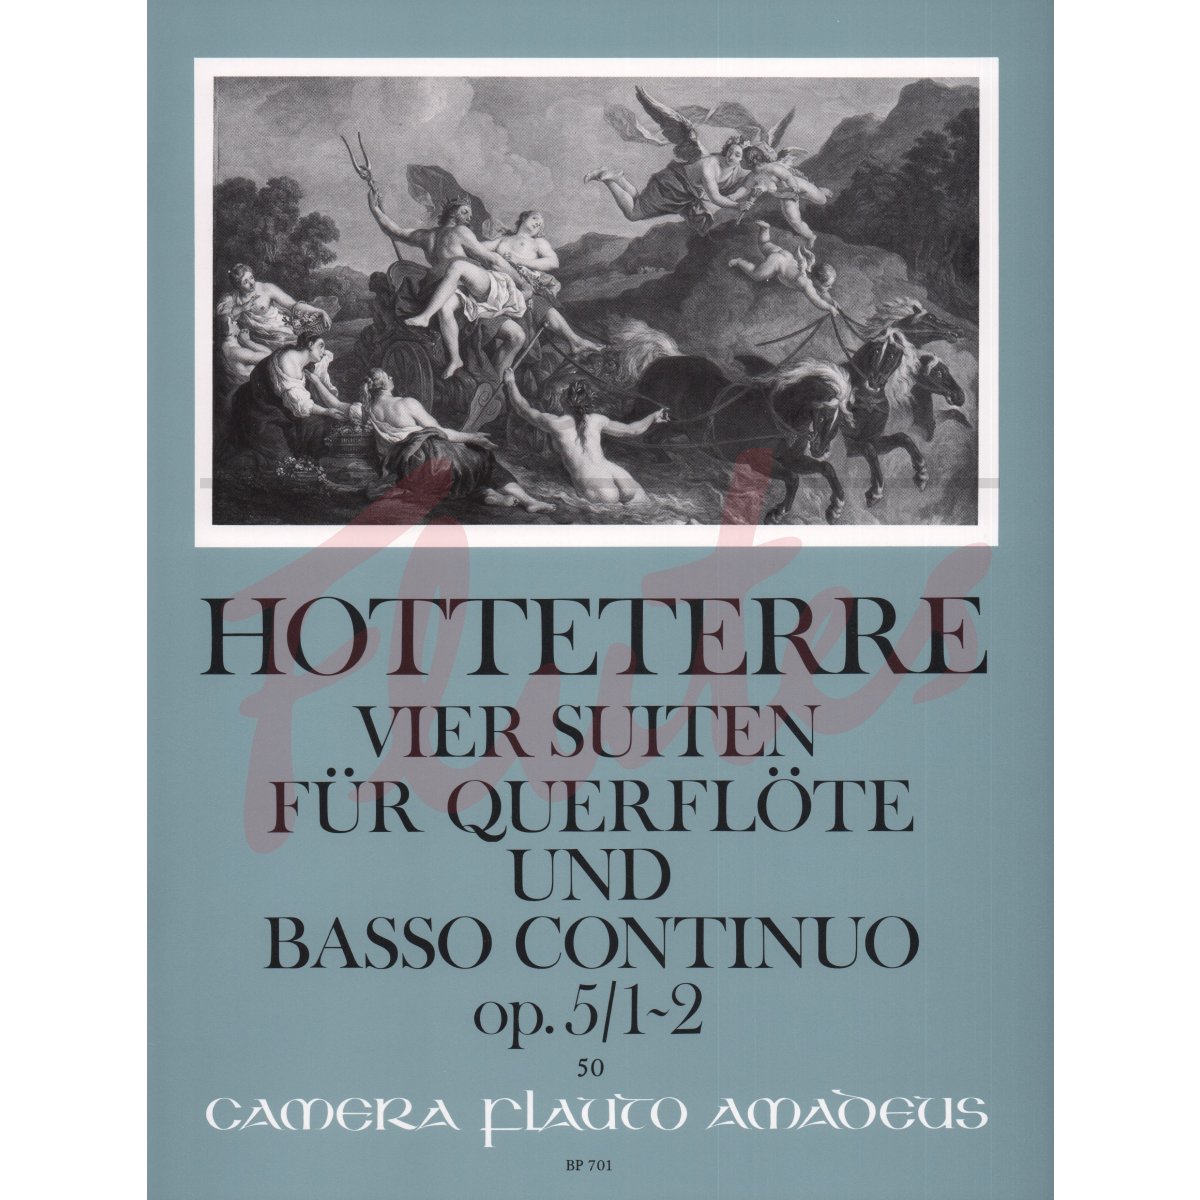 4 Suites for Flute and Basso Continuo